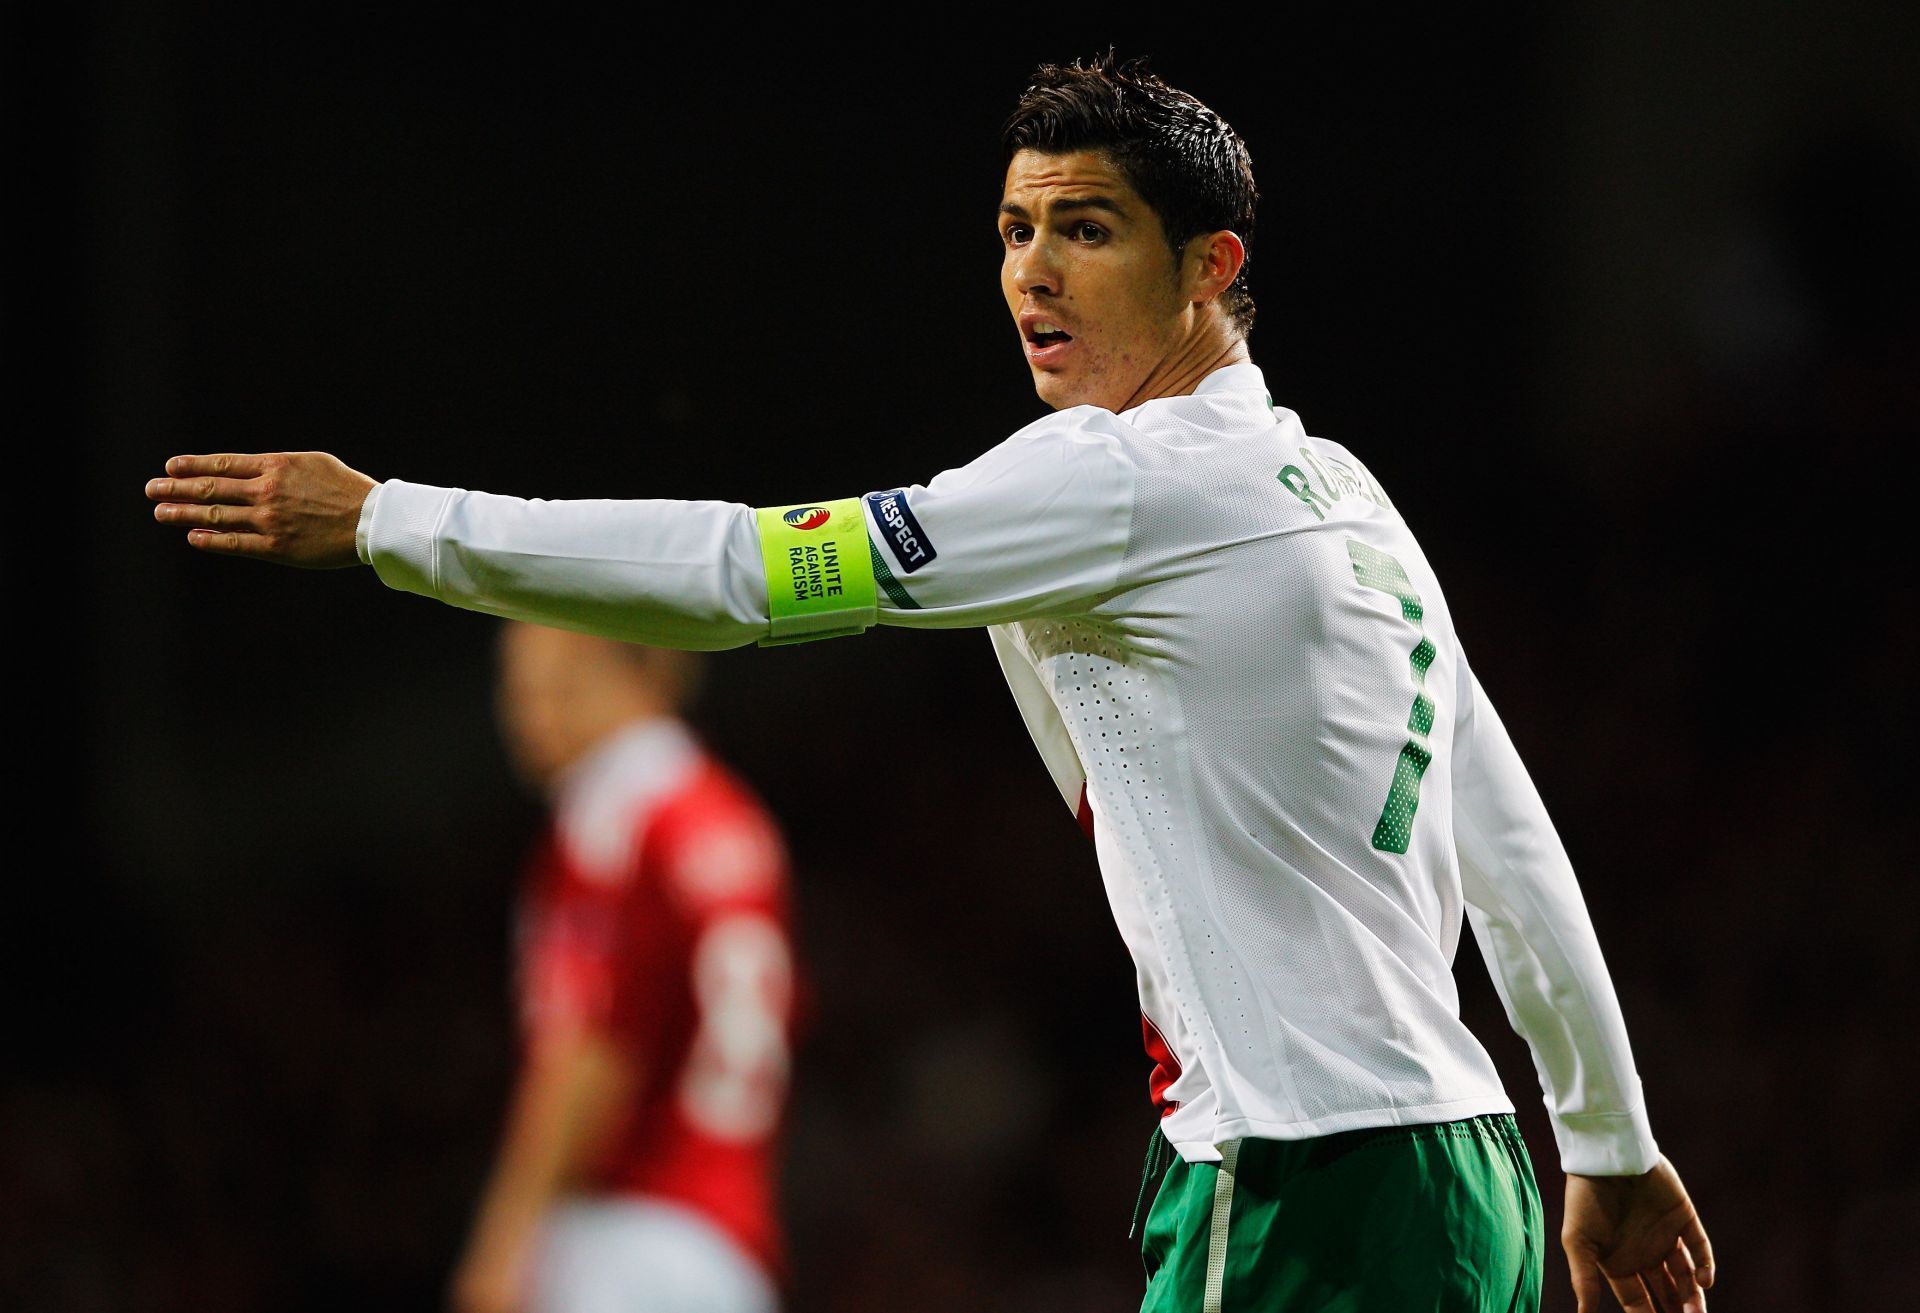 Cristiano Ronaldo sizzled for club and country in 2011.